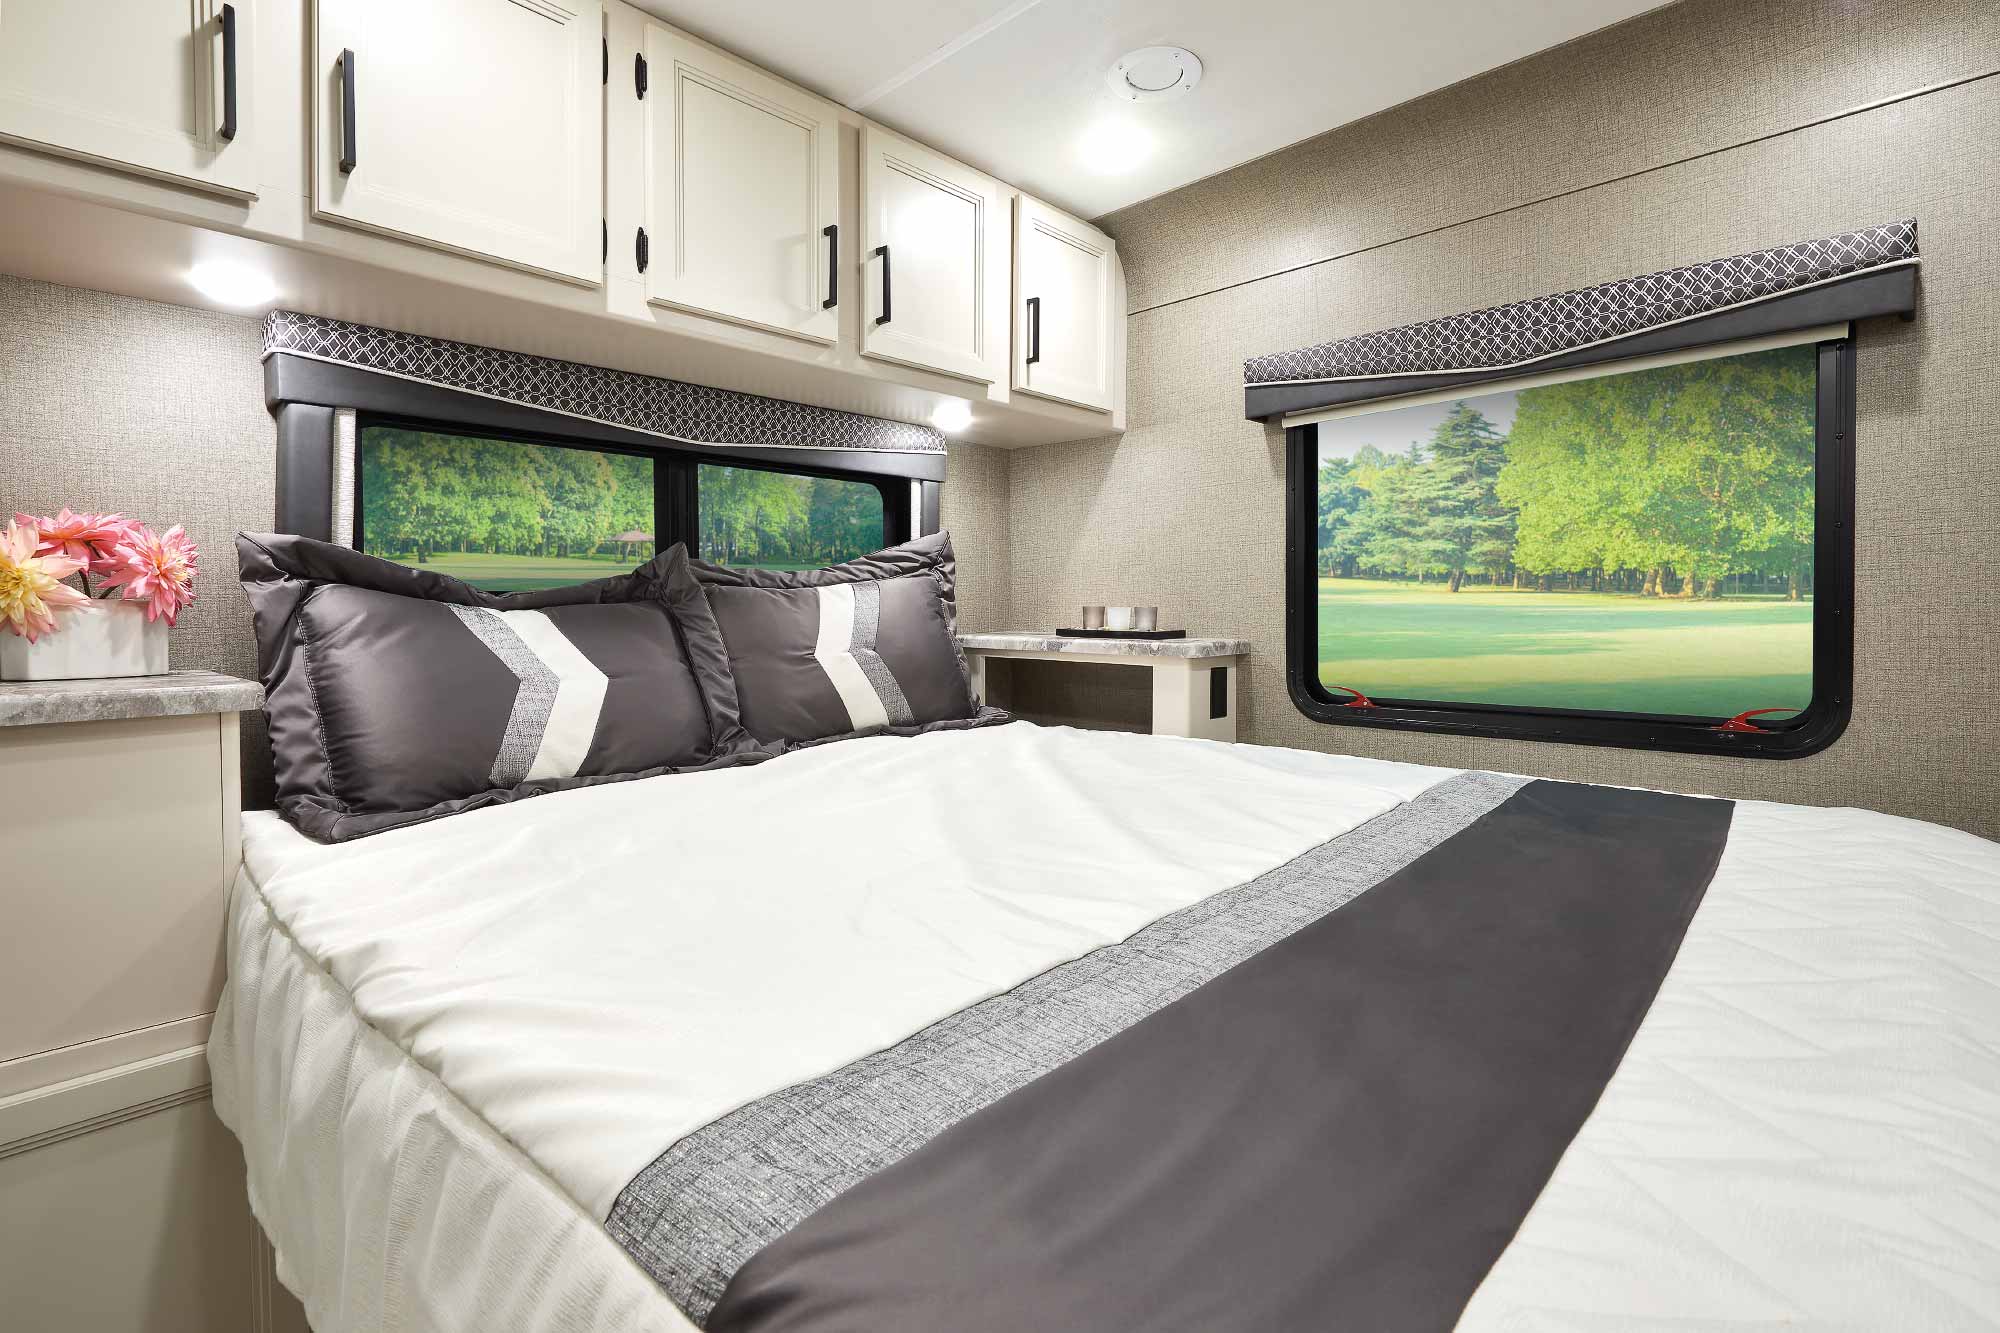 Thor Cau Class C Motorhomes, Class C Rv With King Size Bed